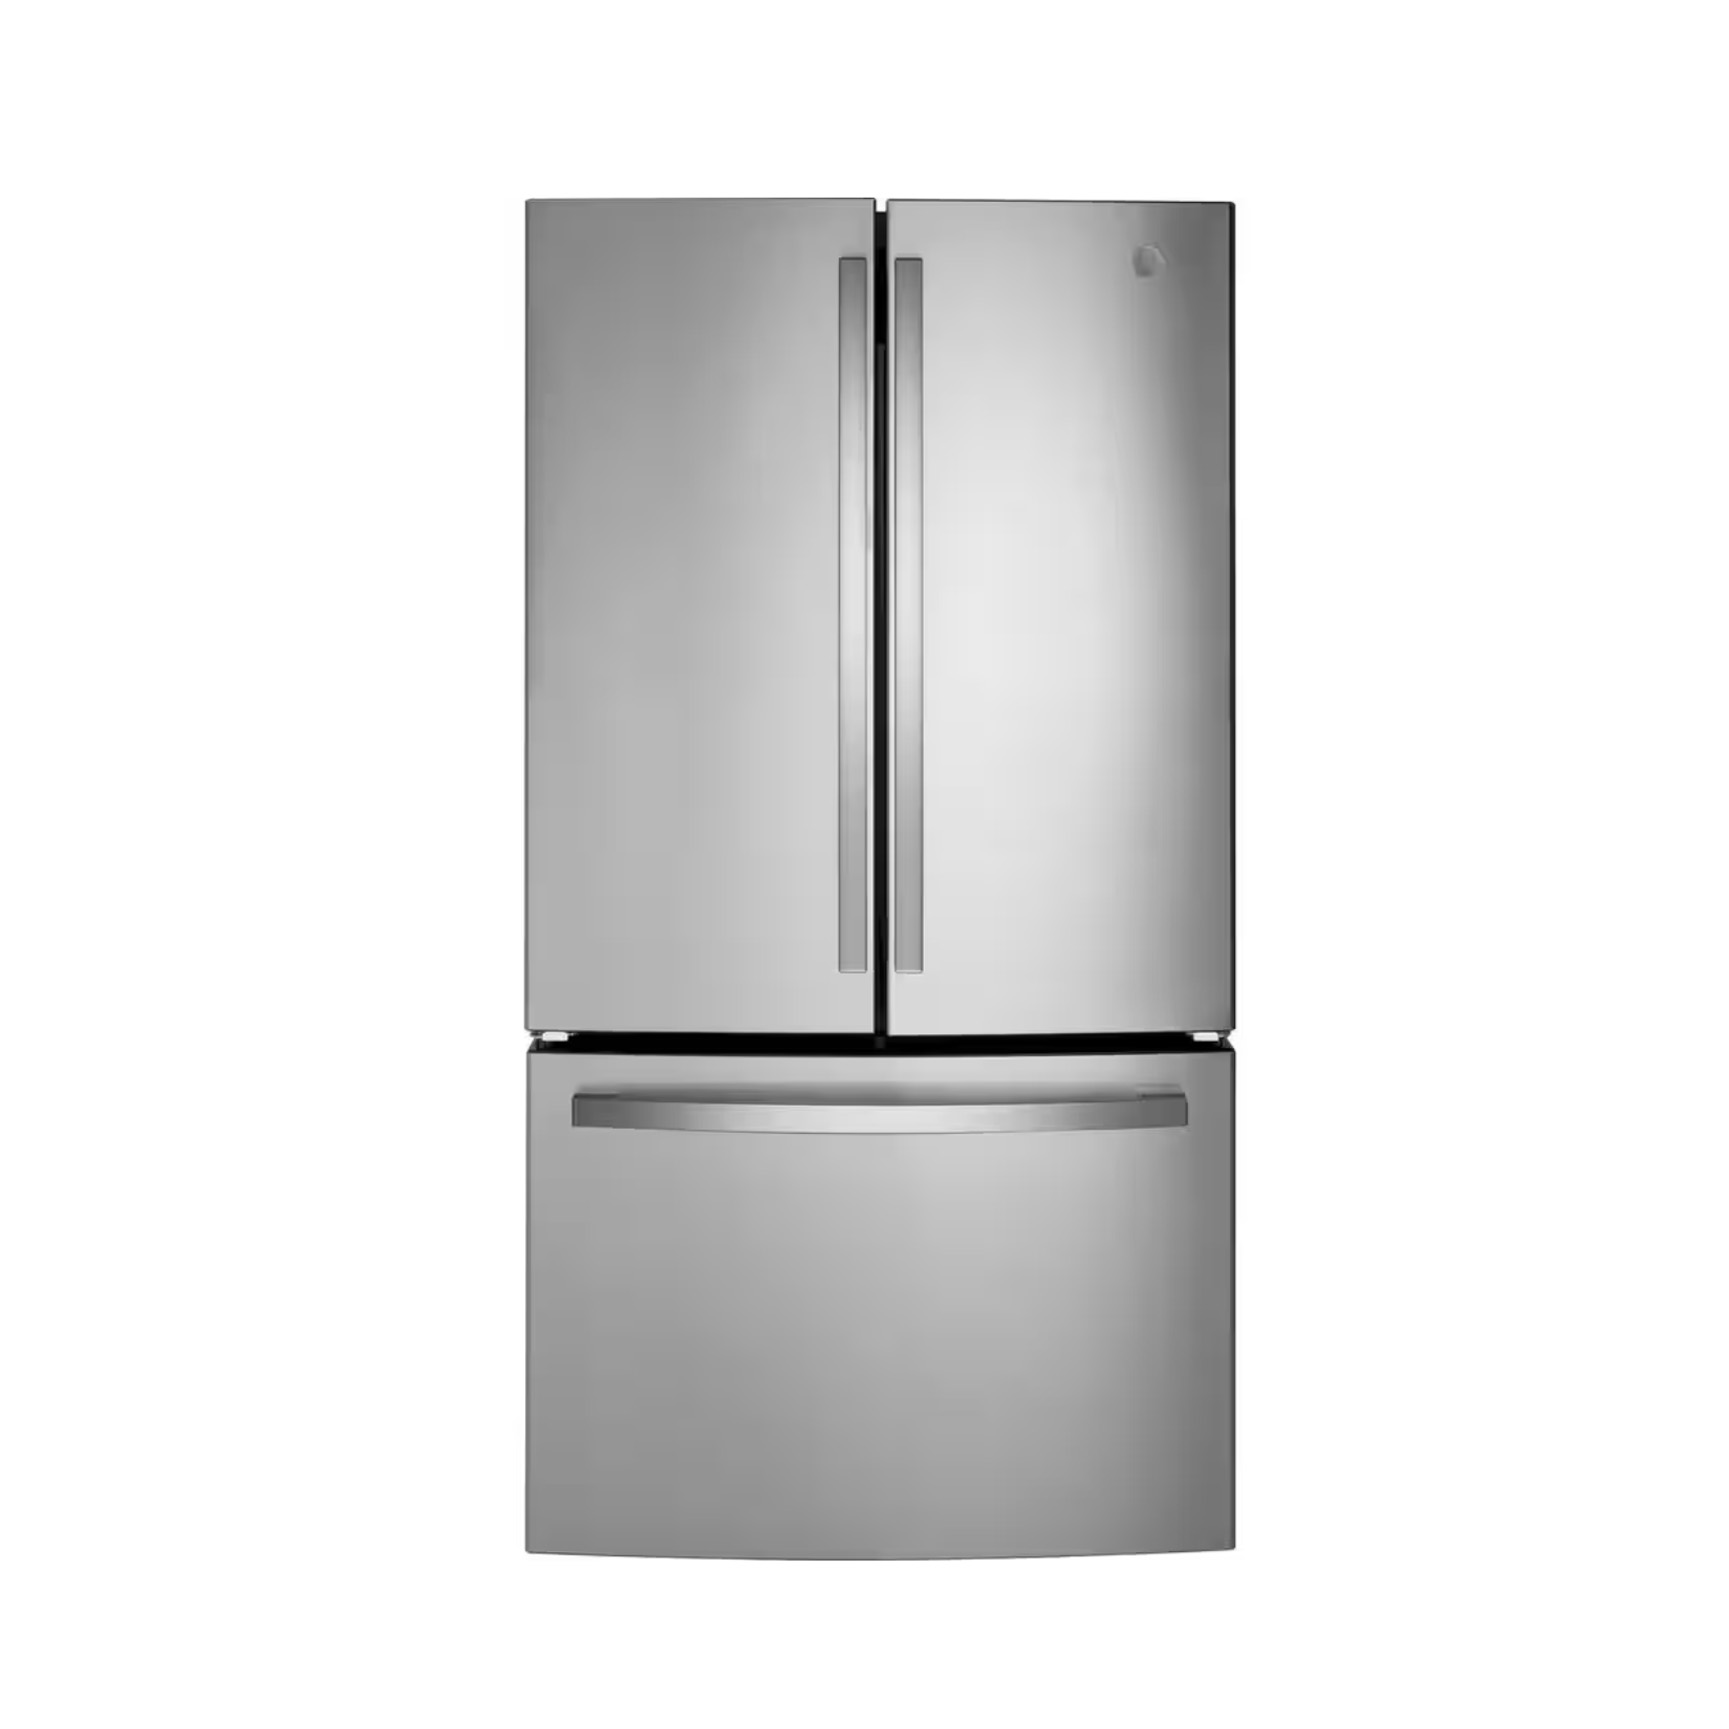 GE 27 cu. ft. French Door Refrigerator in silver with Fingerprint Resistant Stainless with Internal Dispenser